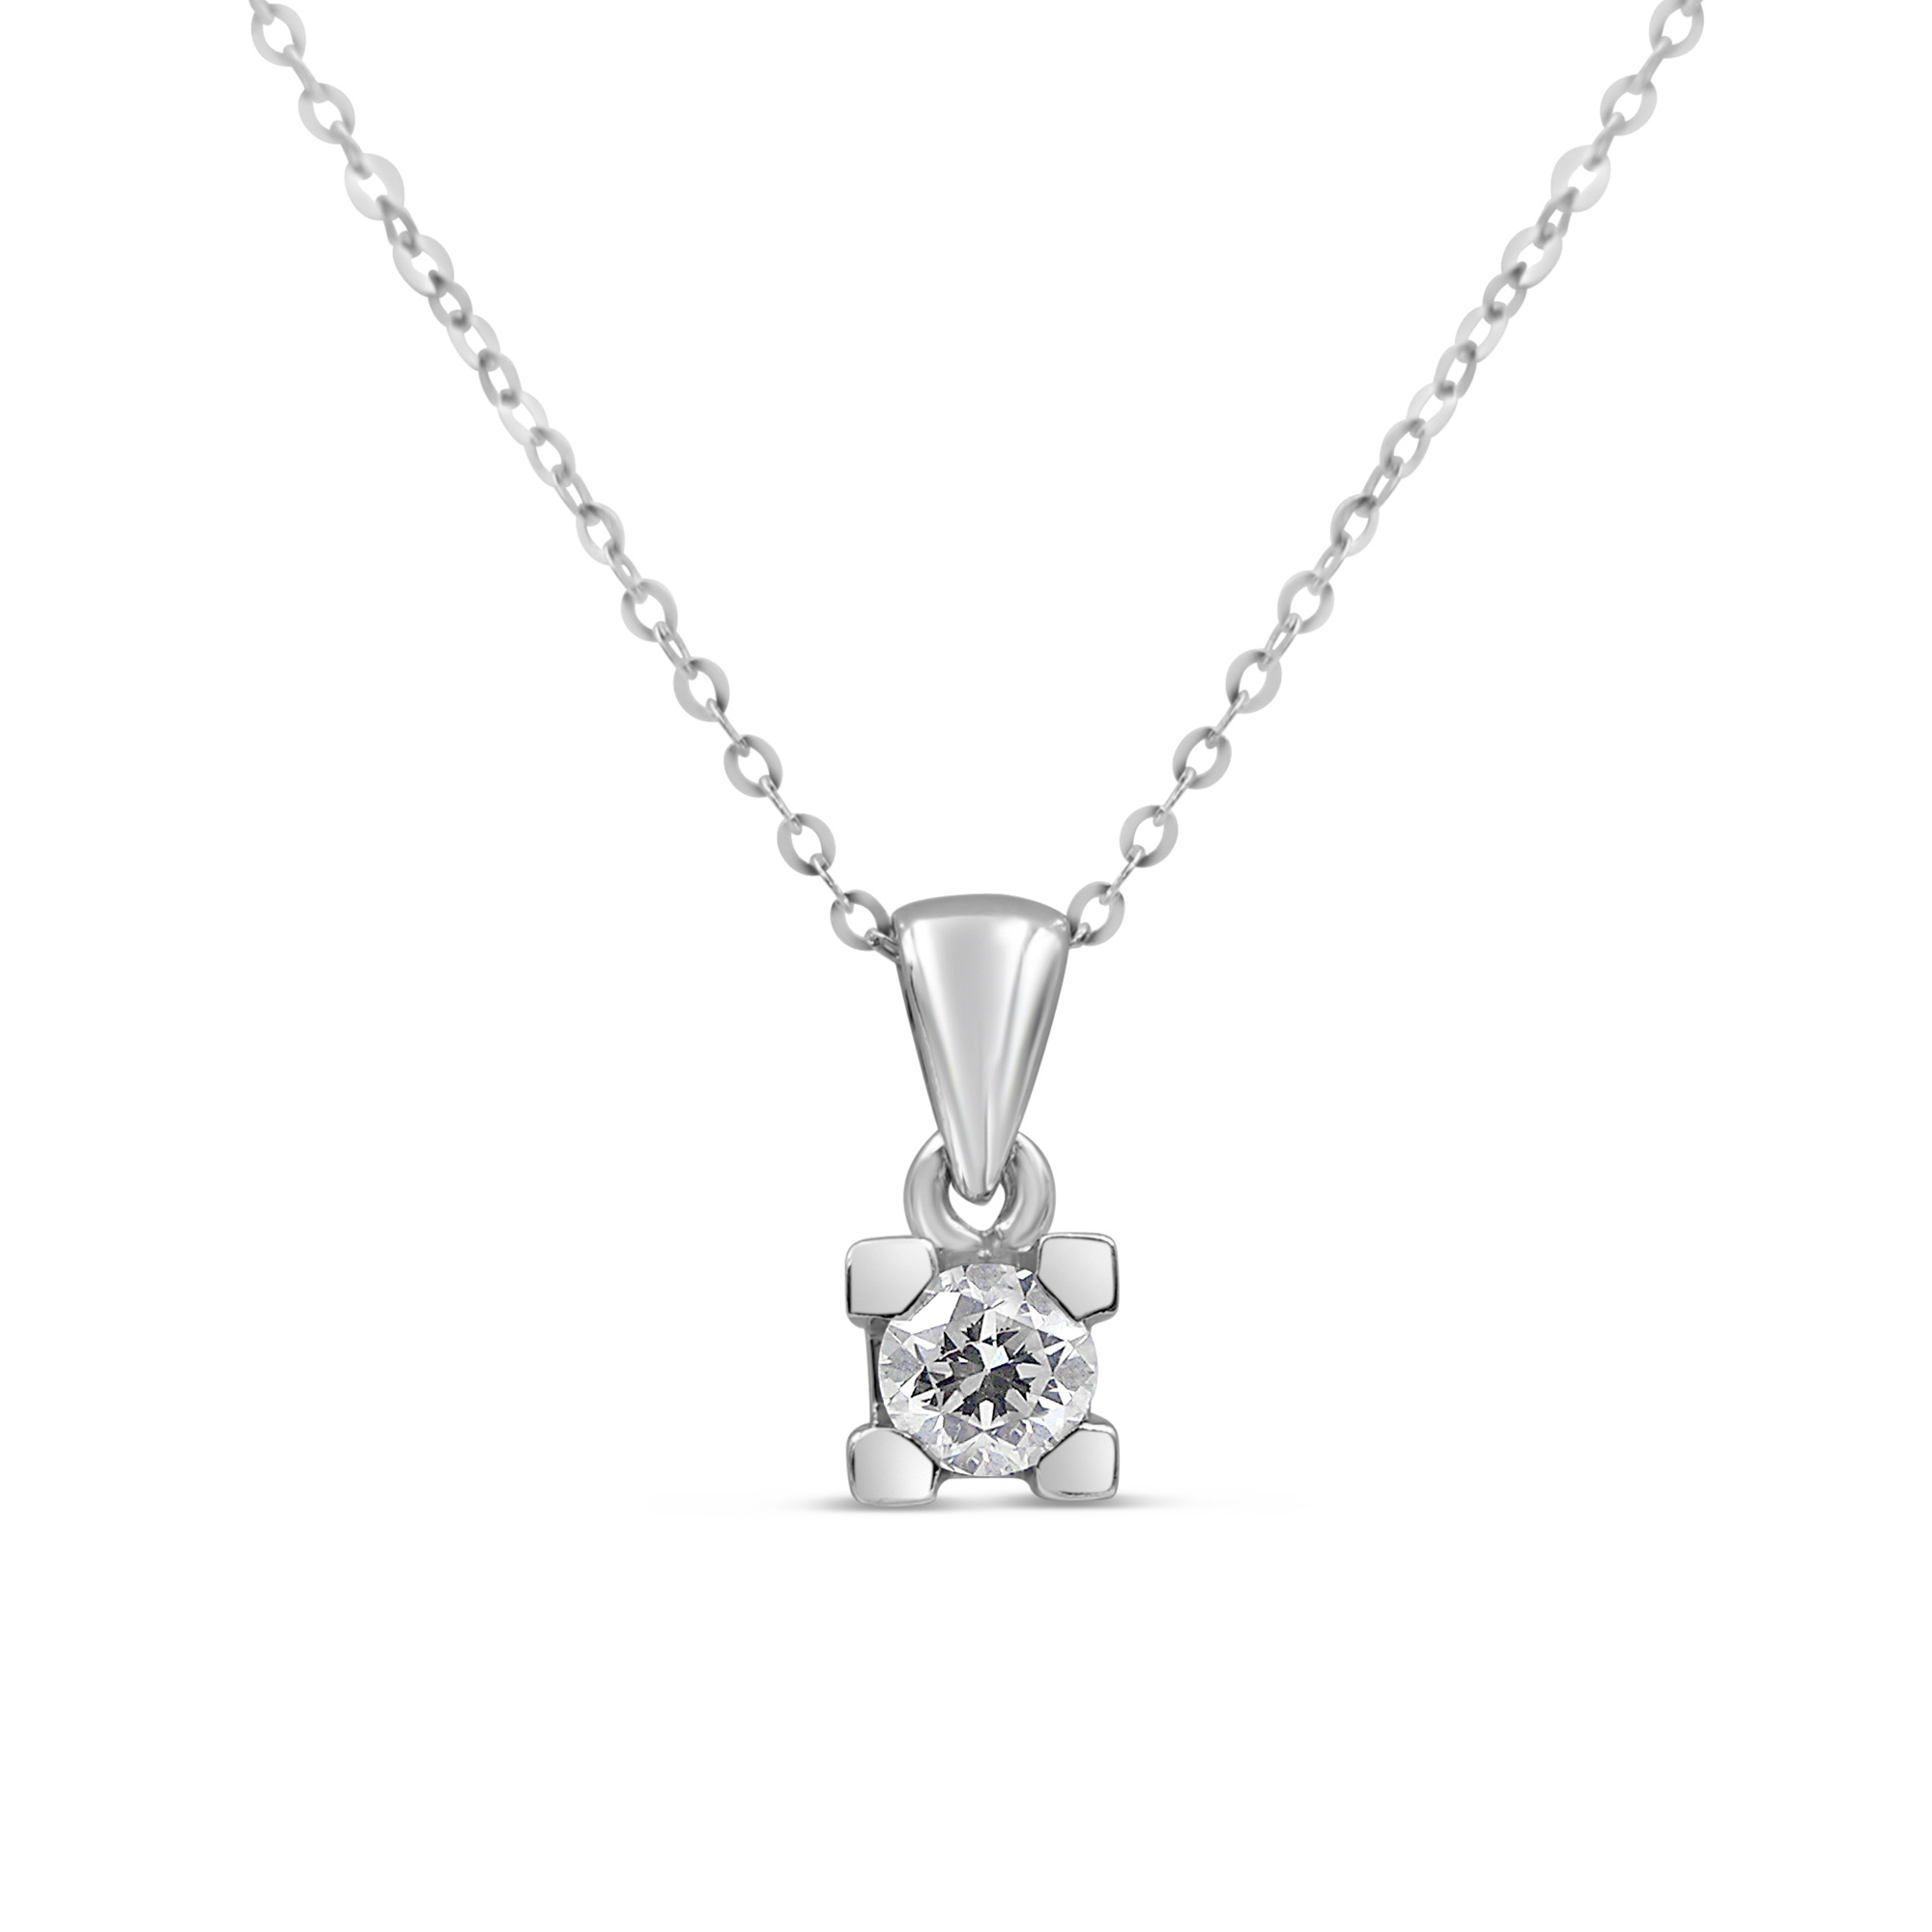 18kt white gold pendant with 0.30 ct diamond